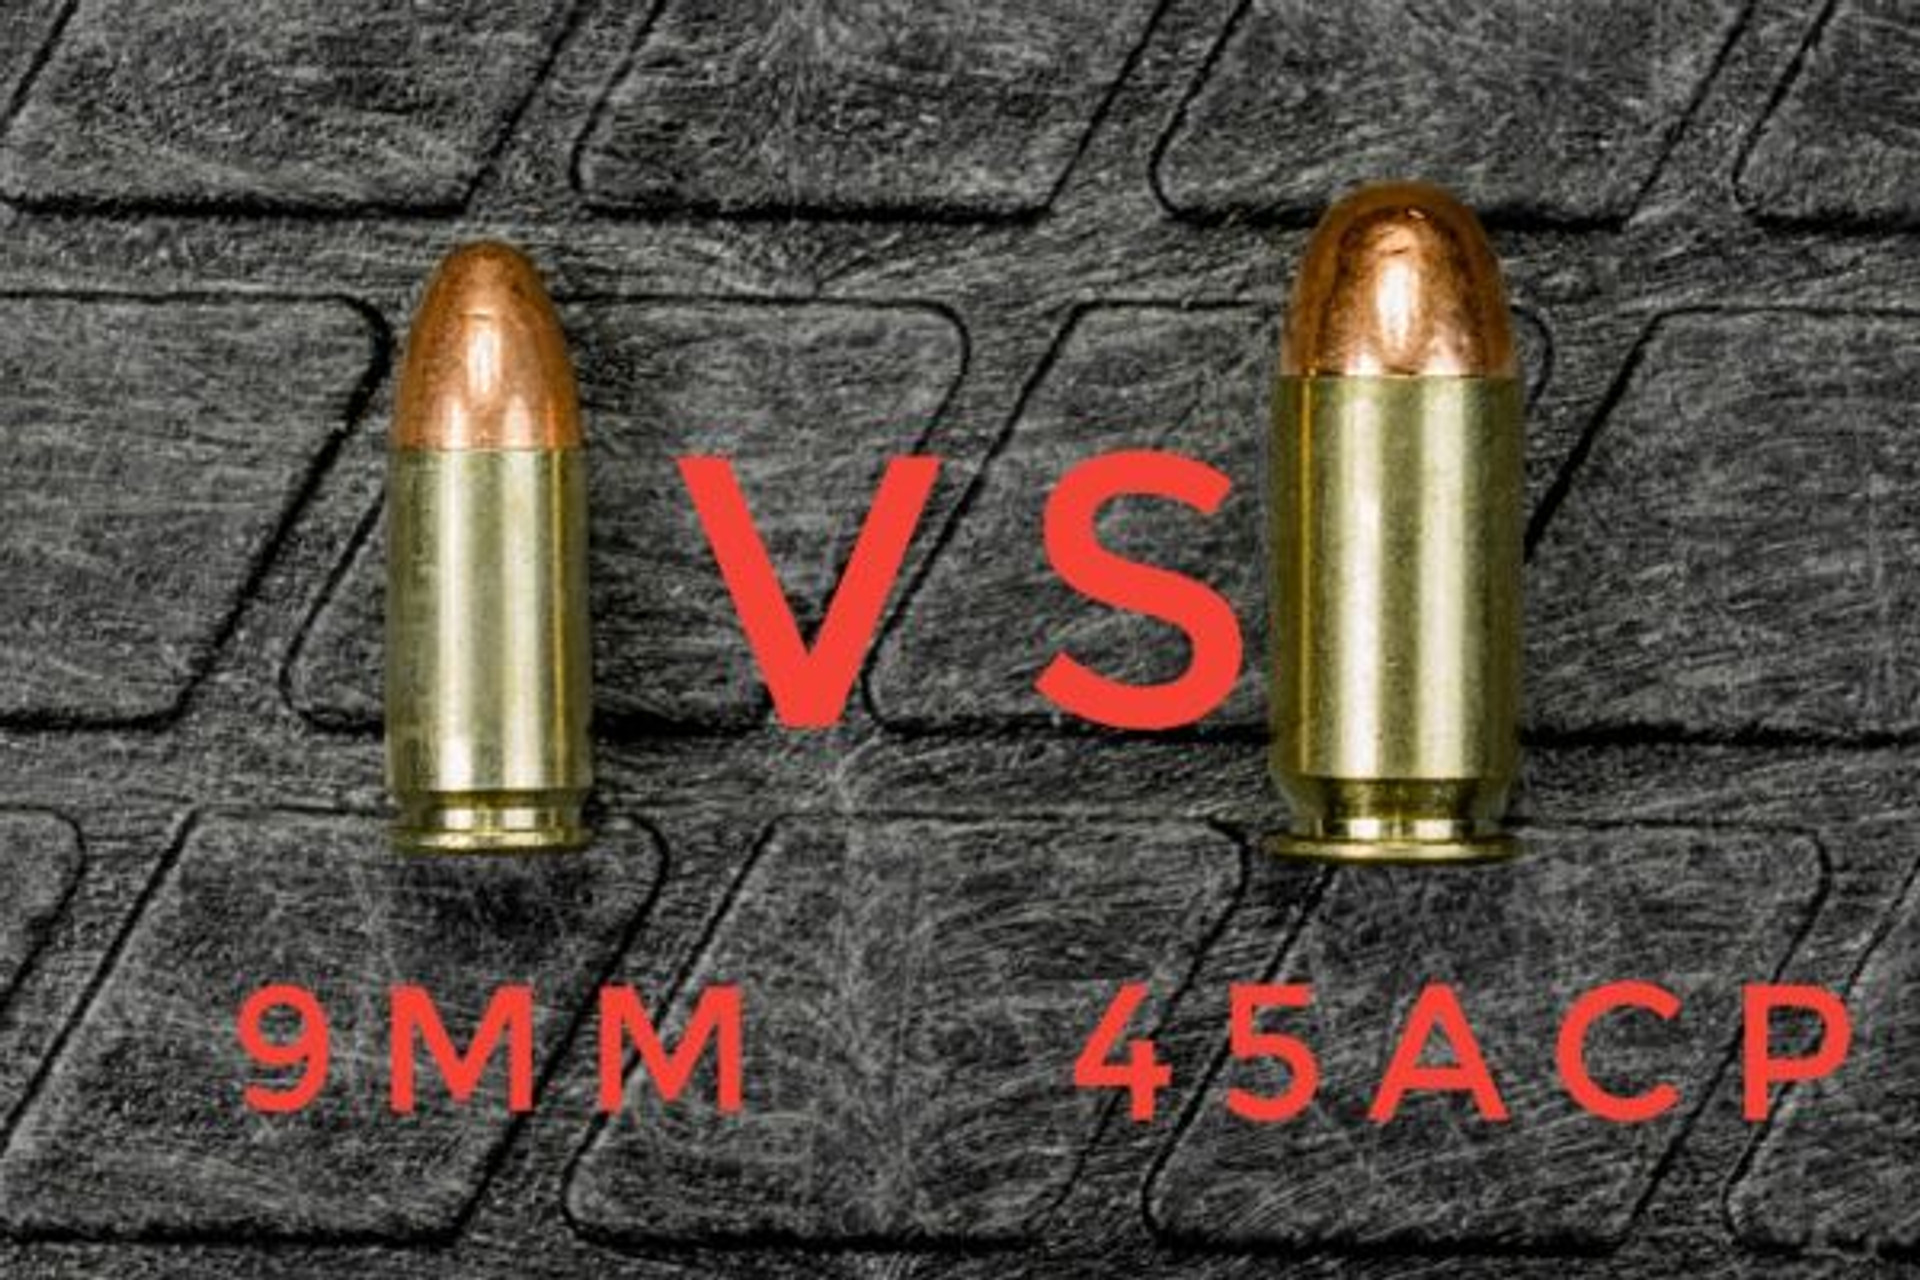 9mm vs .45 ACP, Why People Argue About It